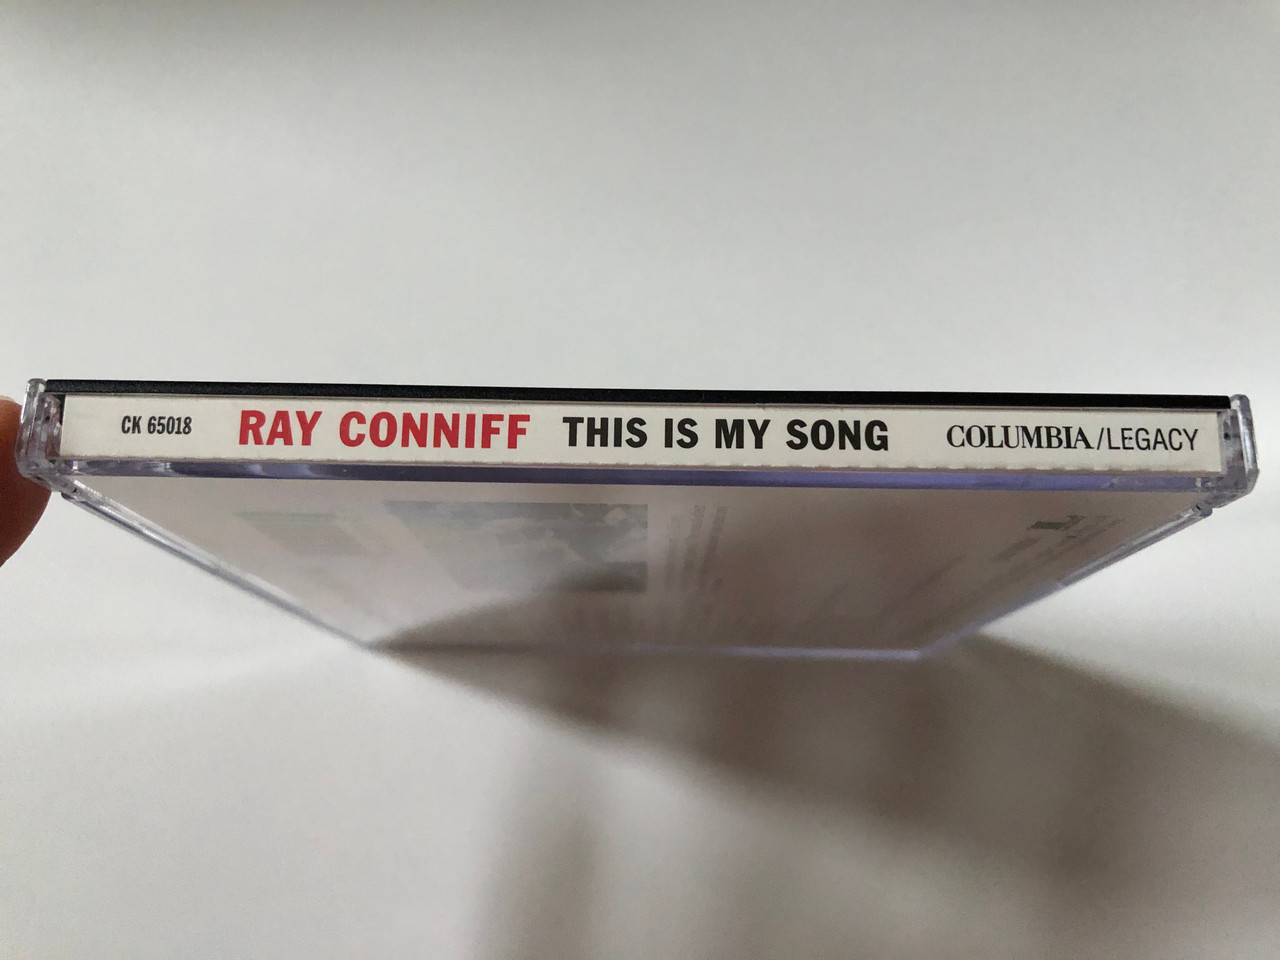 https://cdn10.bigcommerce.com/s-62bdpkt7pb/products/0/images/258012/Ray_Conniff_And_The_Singers_This_Is_My_Song_And_Other_Great_Hits_This_Is_My_Song_Mame_Sunrise_Sunset_Cabaret_Strangers_In_The_Night_What_Now_My_Love_My_Cup_Runneth_Over_Winchester_3__25488.1667933562.1280.1280.JPG?c=2&_gl=1*ccvbtl*_ga*MjA2NTIxMjE2MC4xNTkwNTEyNTMy*_ga_WS2VZYPC6G*MTY2NzkzMzM1OS42MjEuMC4xNjY3OTMzMzU5LjYwLjAuMA..